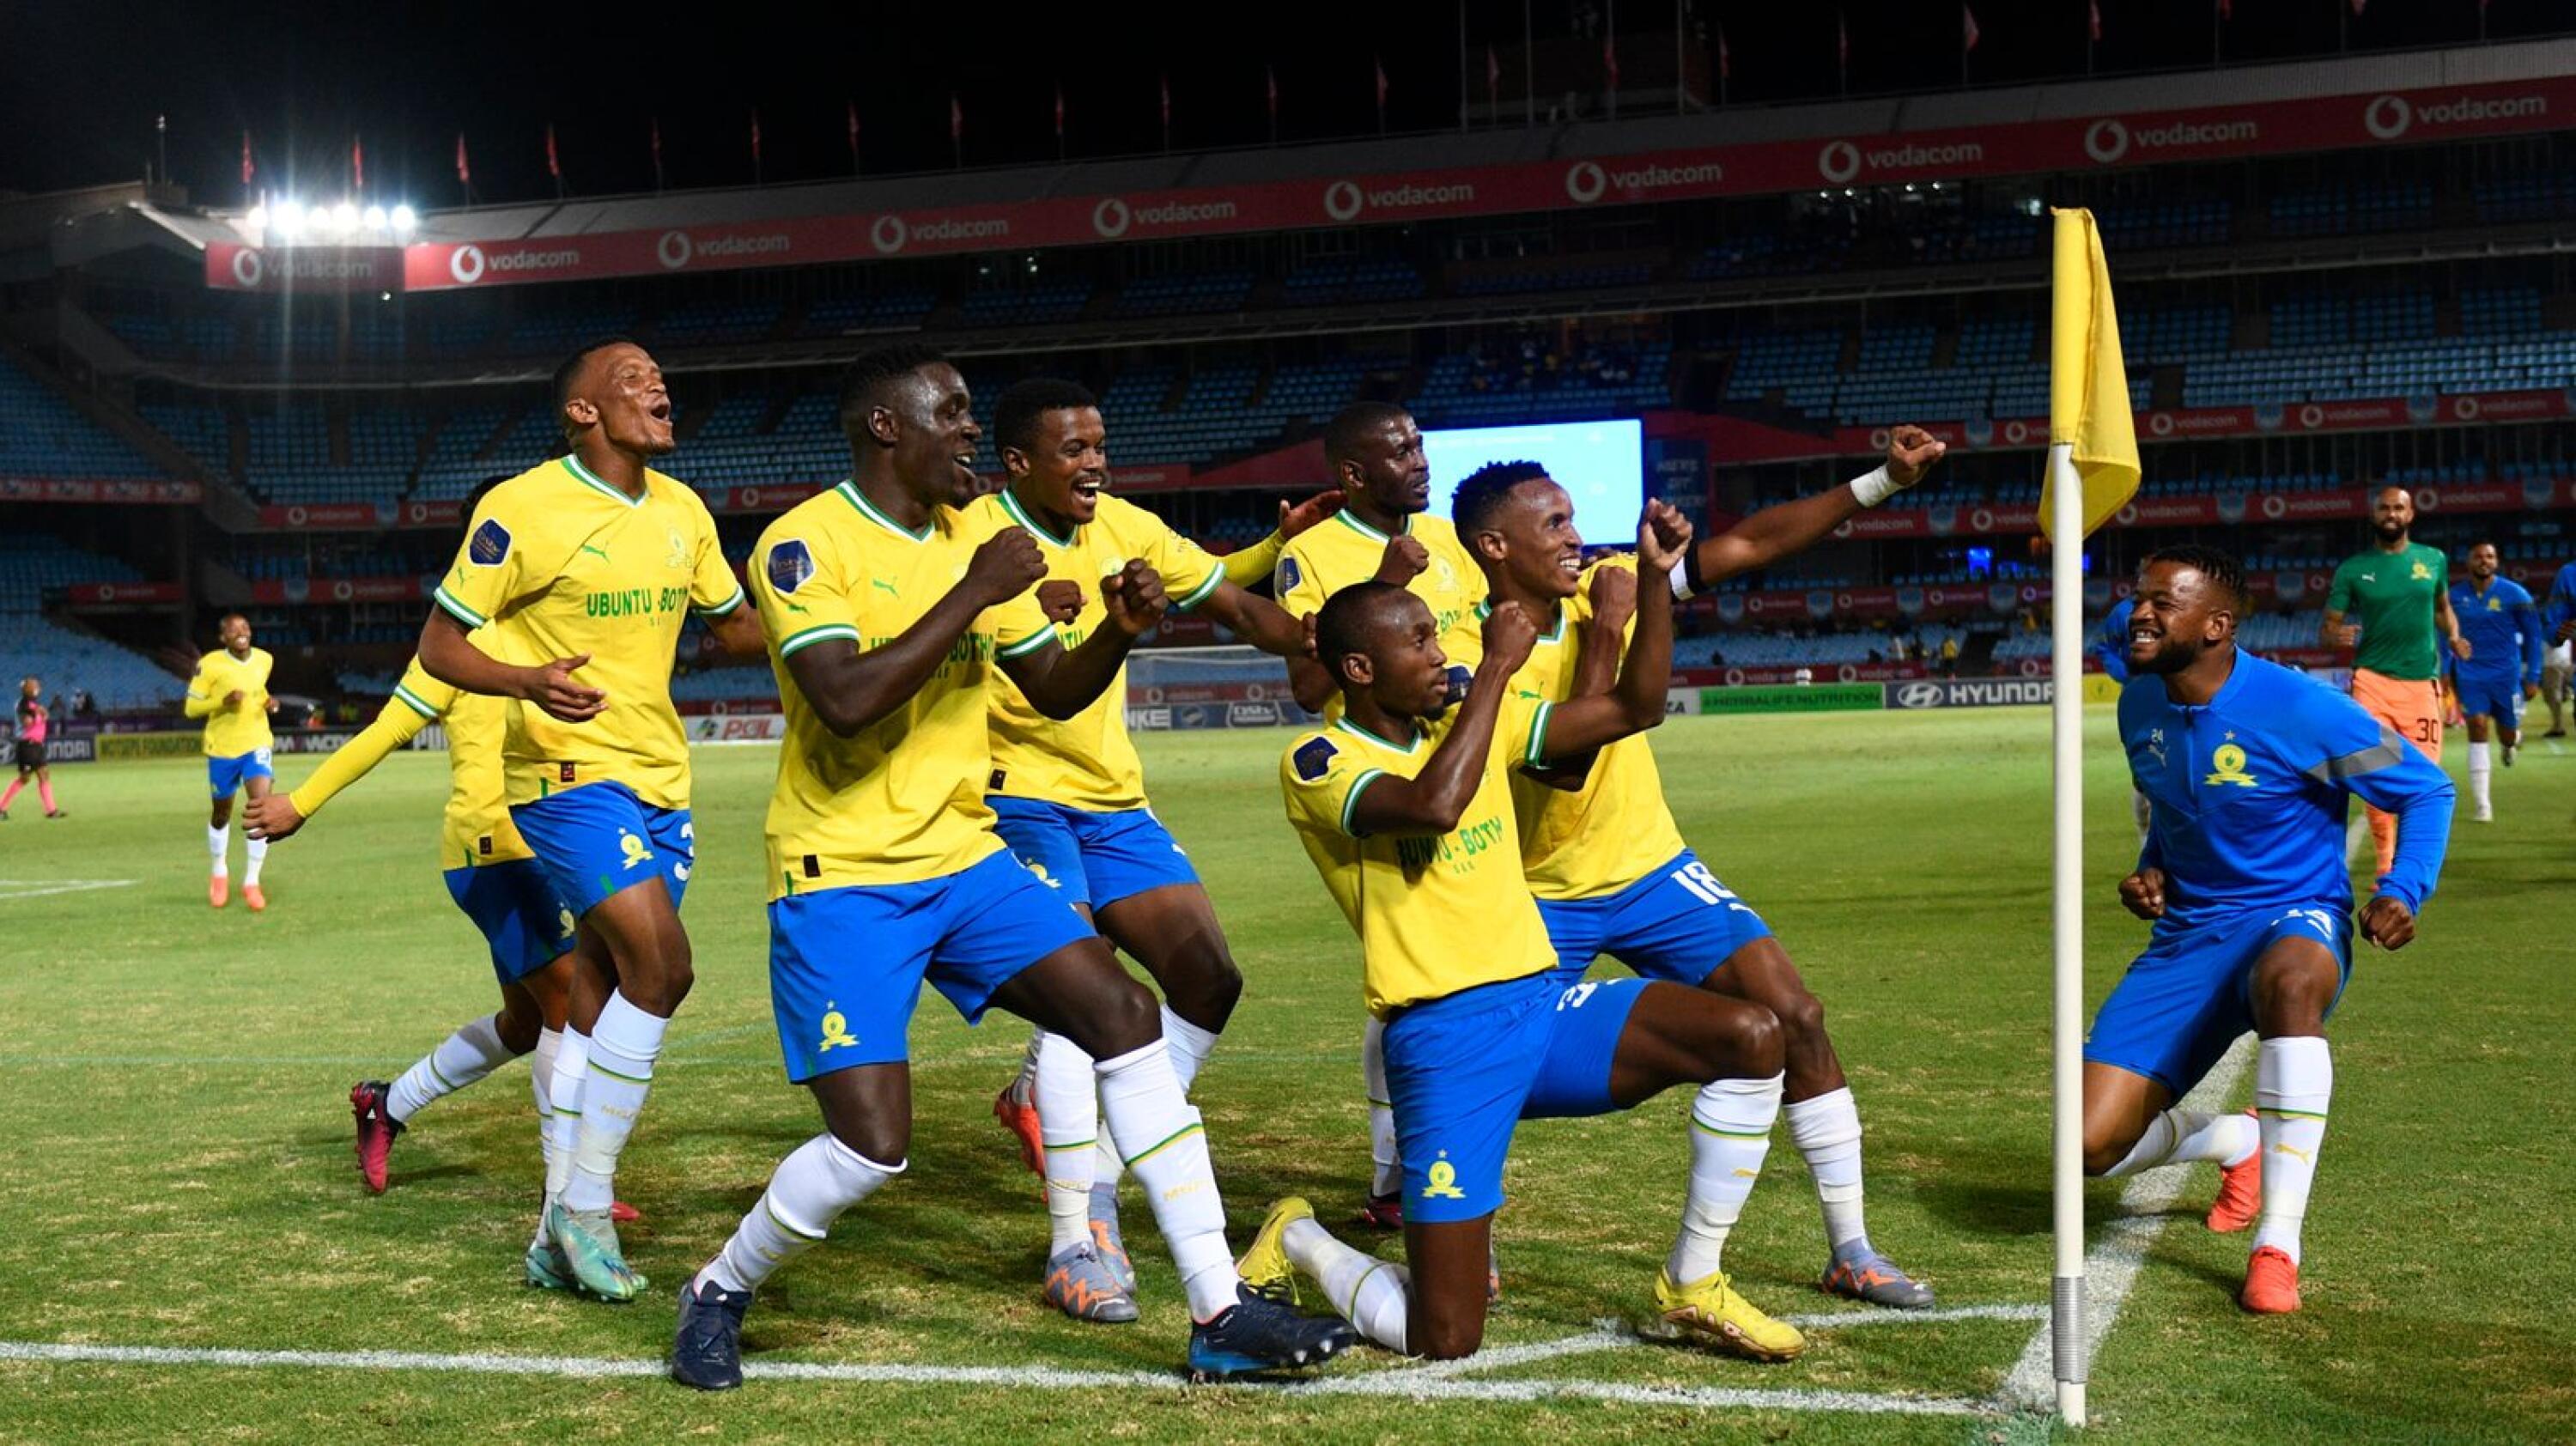 Peter Shalulile of Mamelodi Sundowns celebrates with teammates after scoring a goal during their DStv Premiership match against Royal AM at Loftus Versfeld on Tuesday